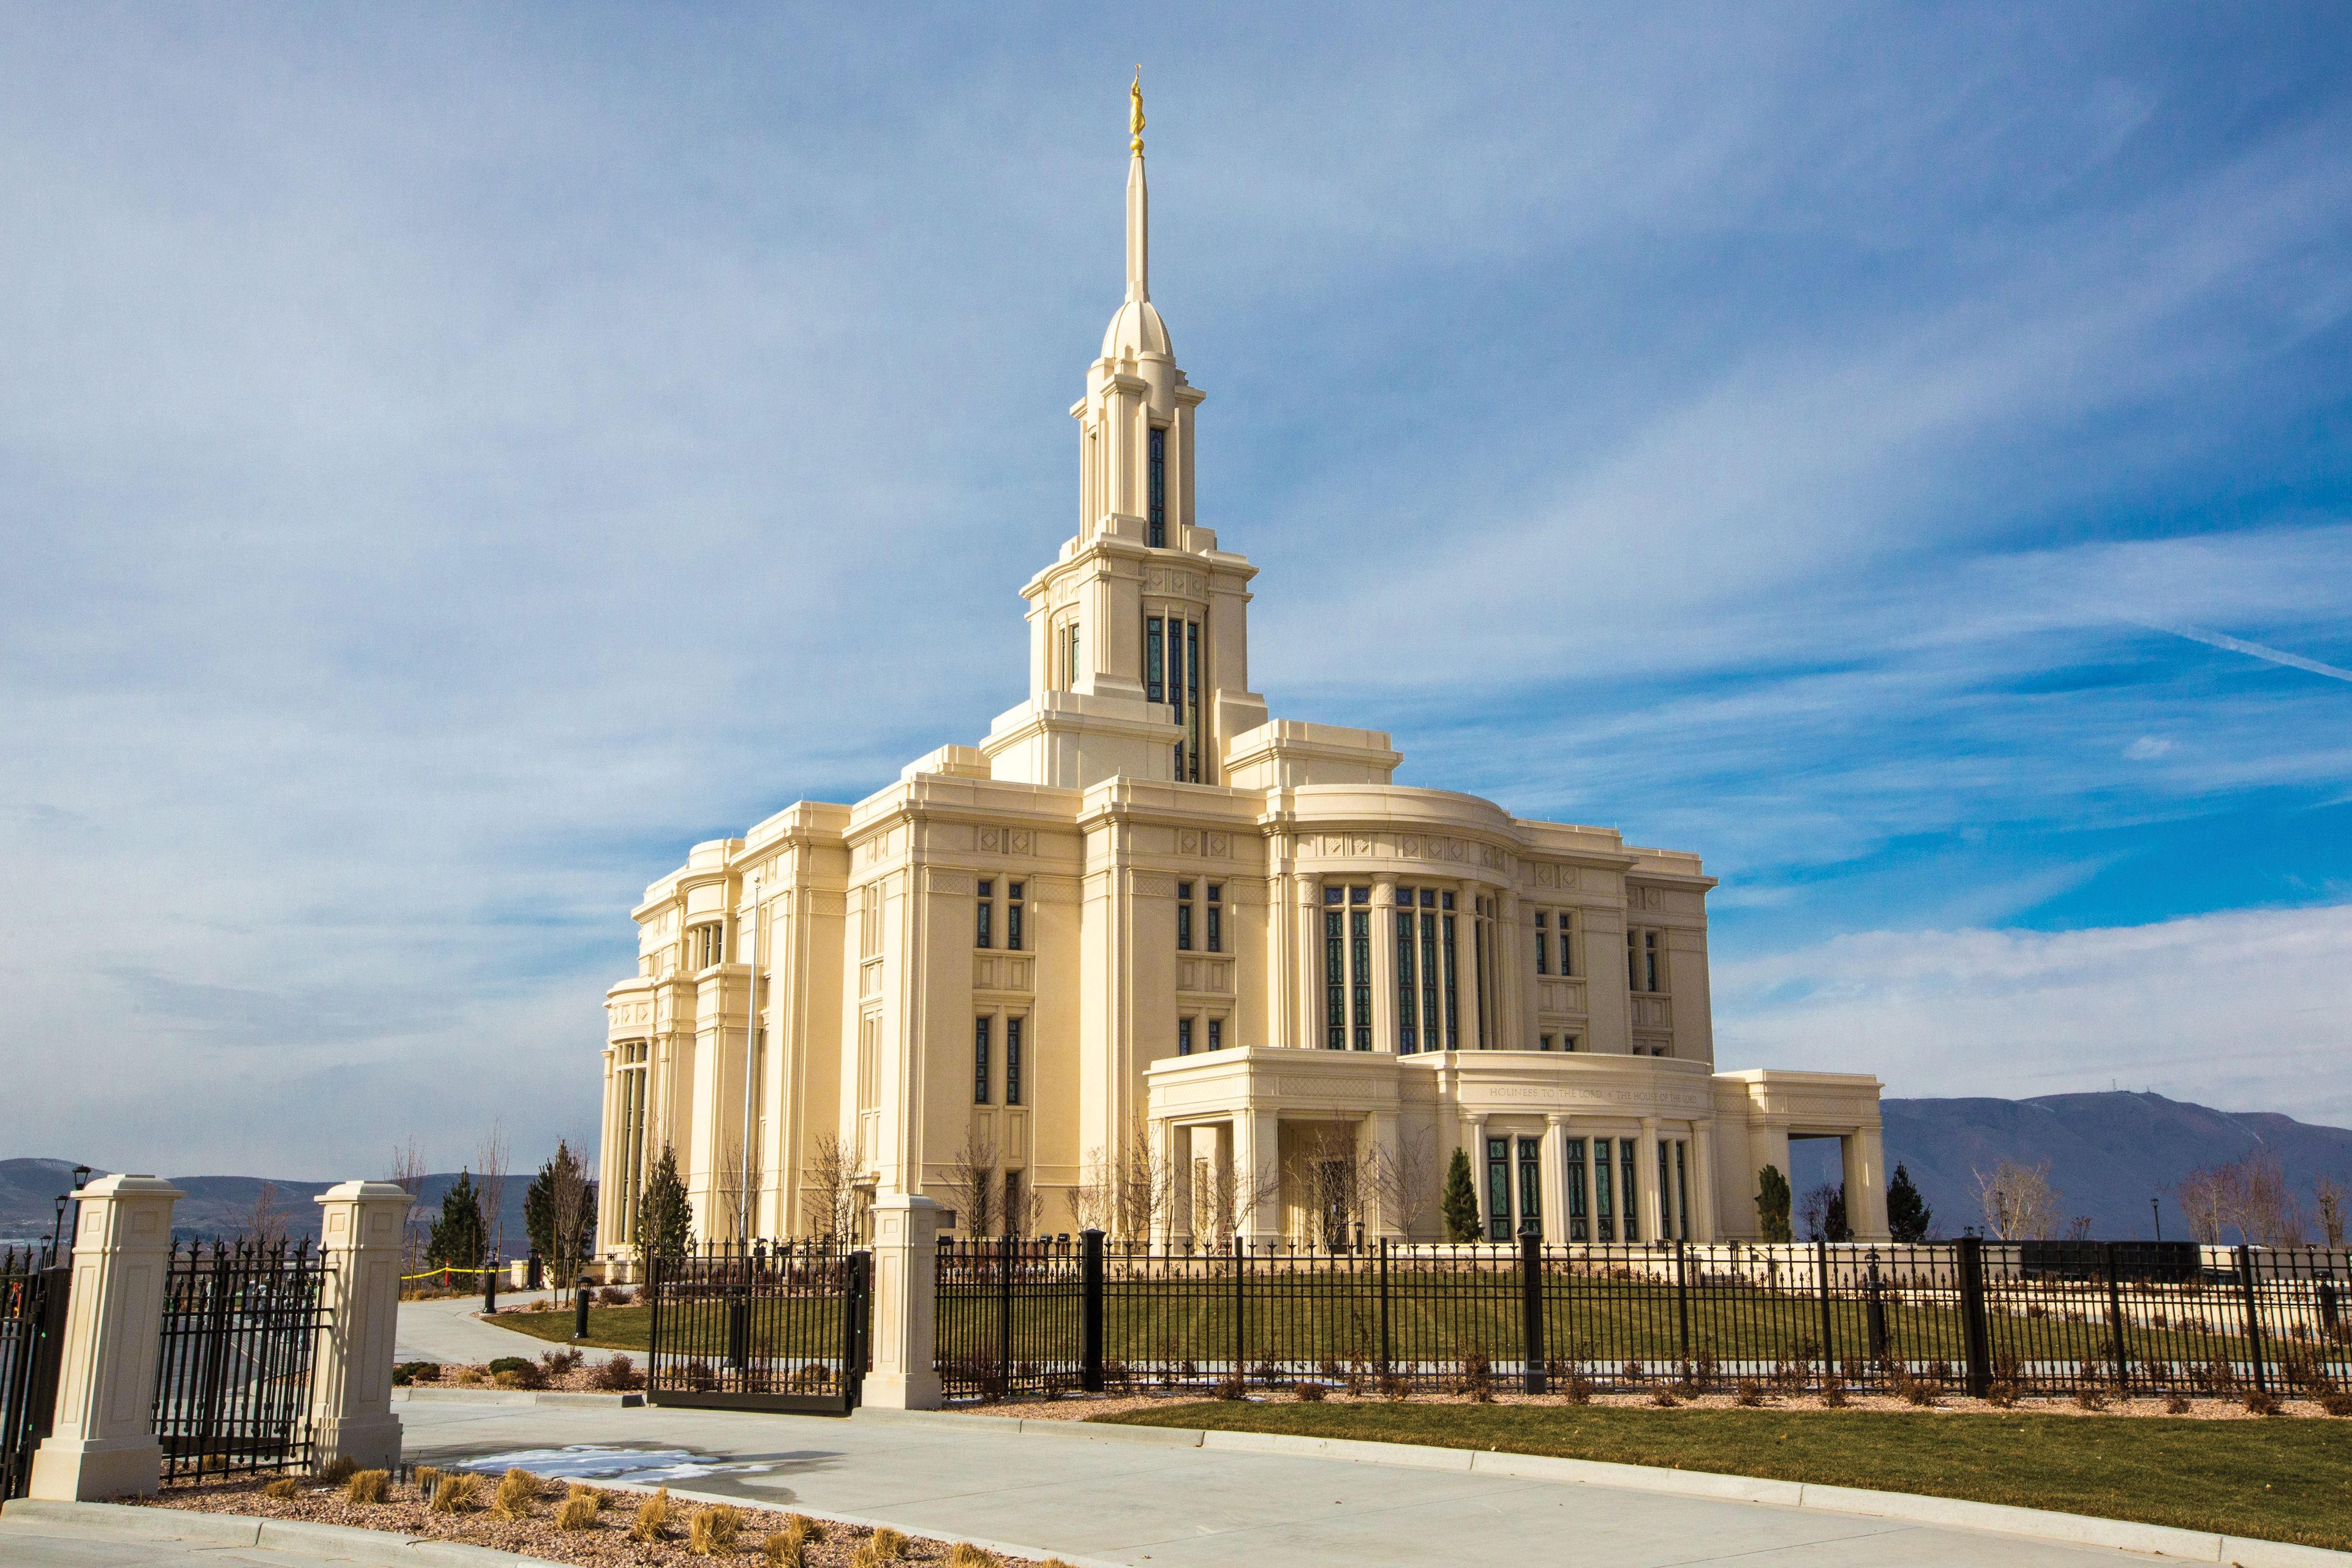 The east side of the Payson Utah Temple, its grounds, and its fence.